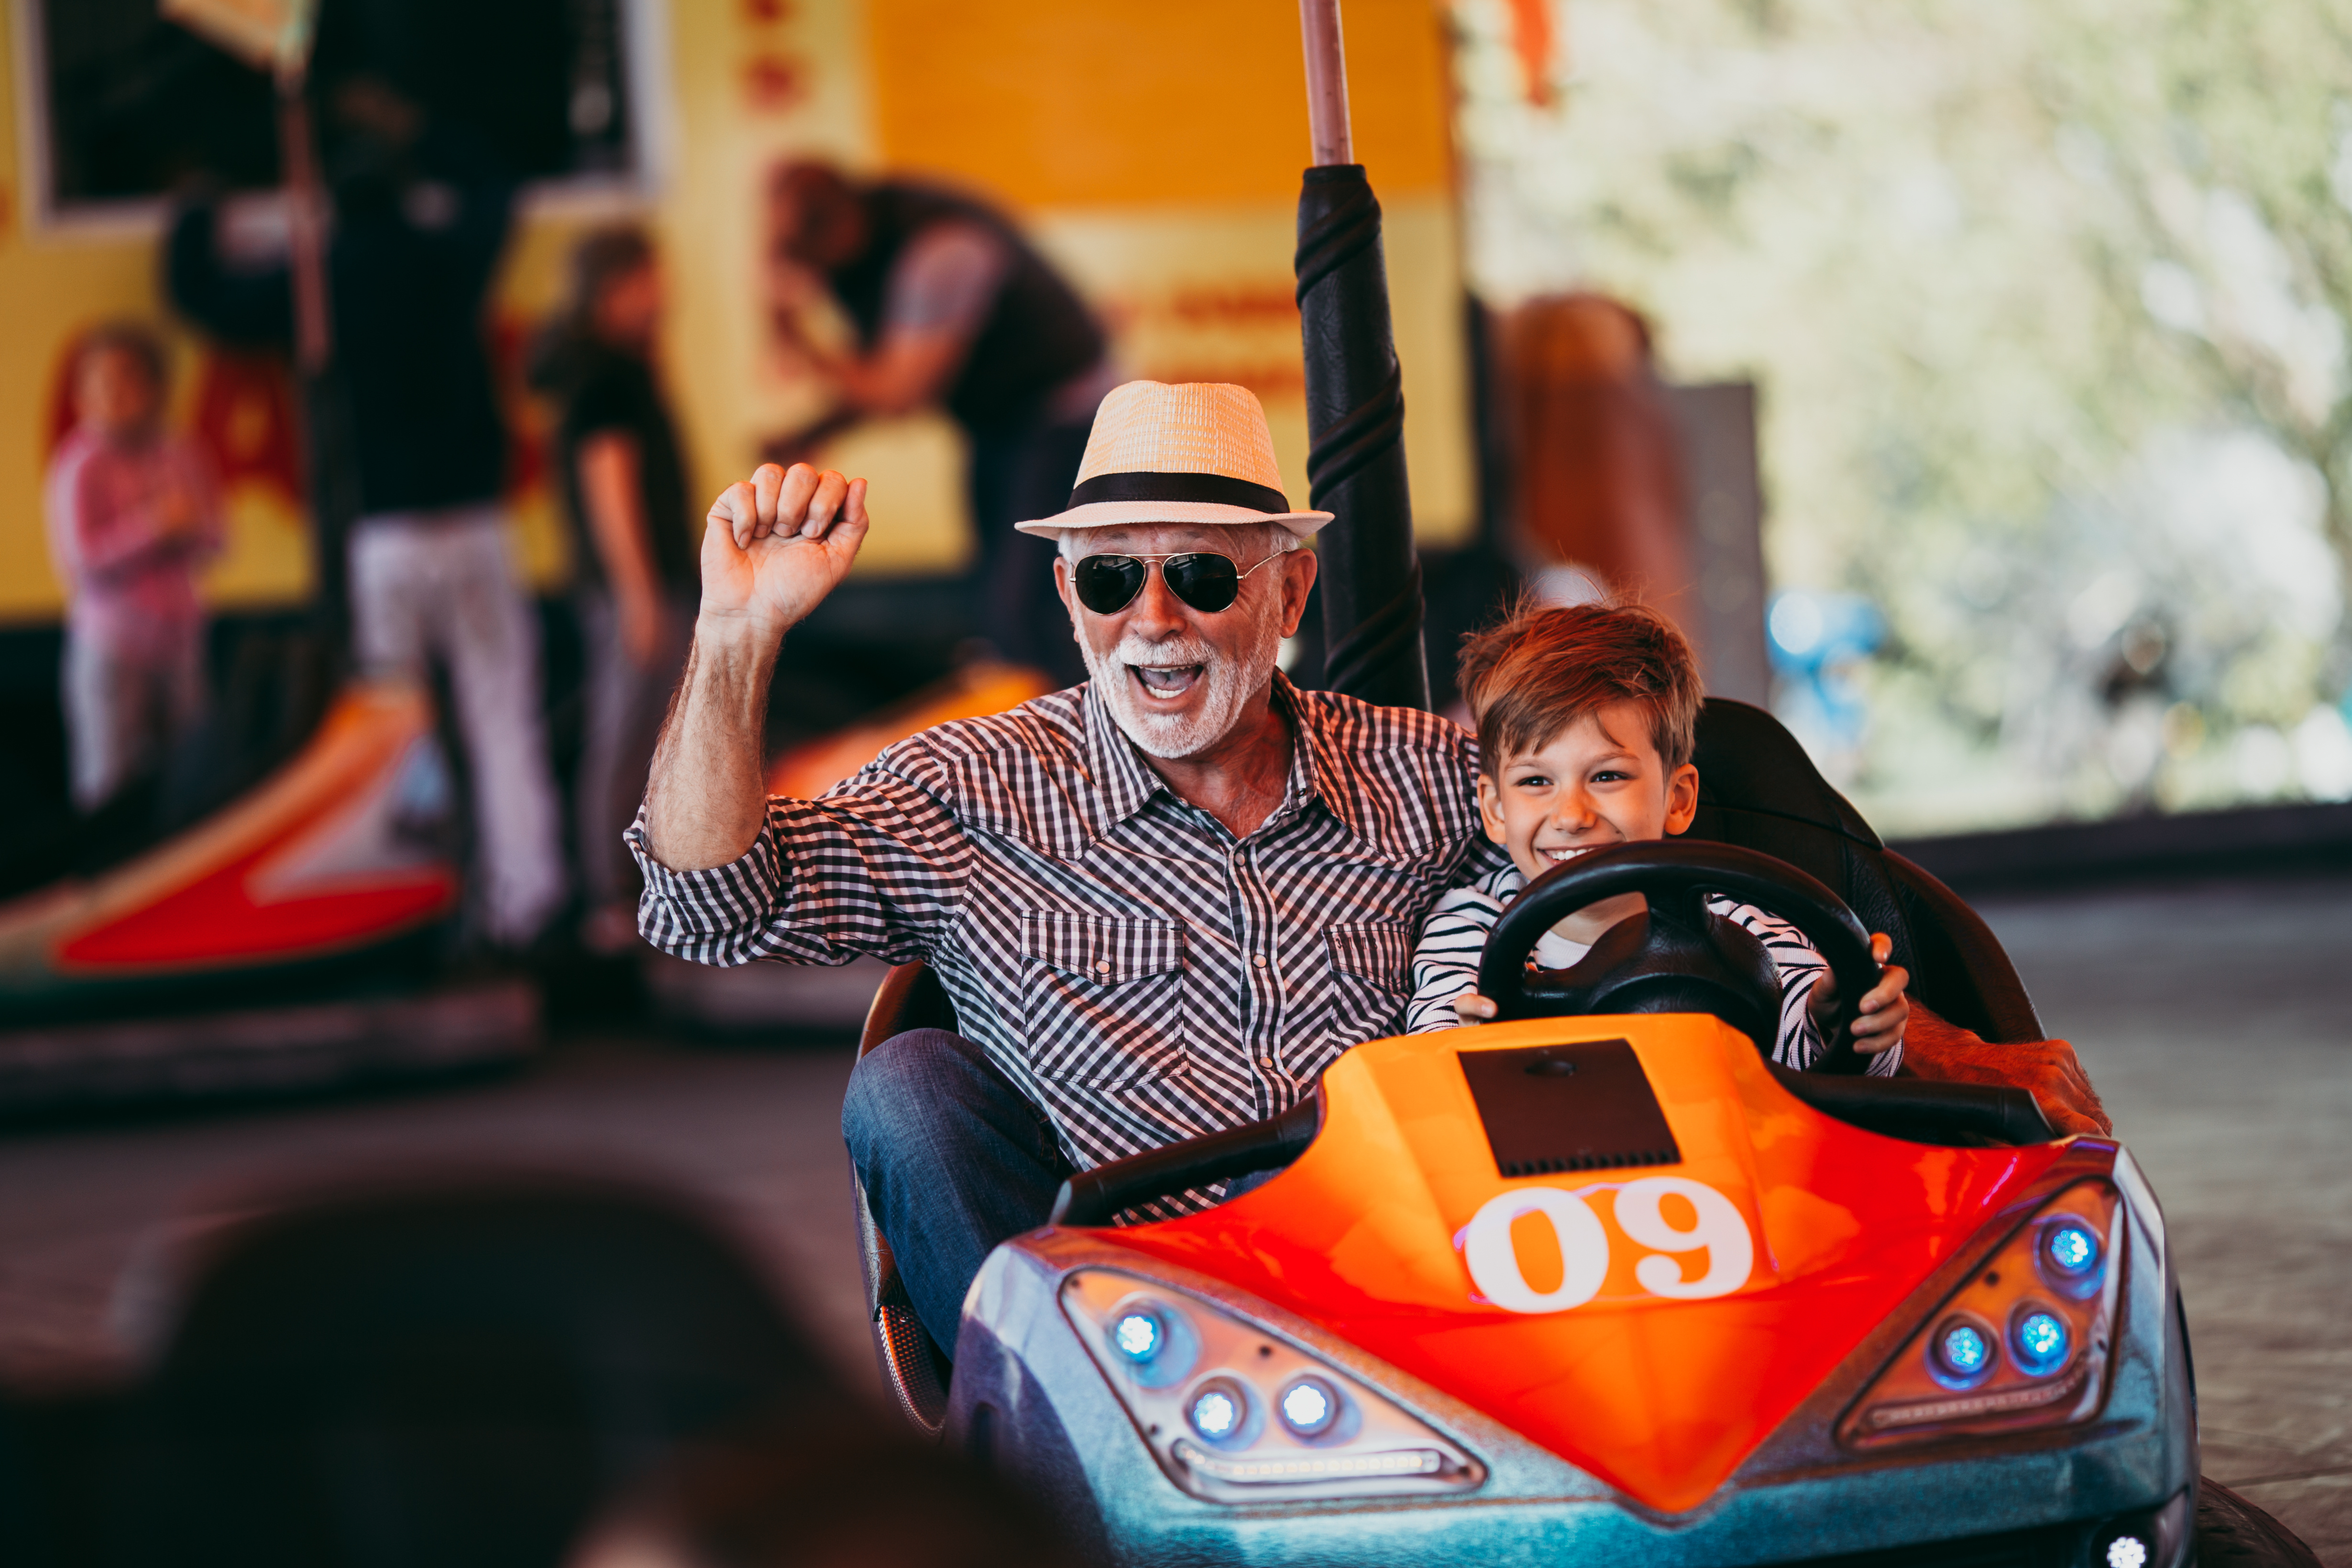 Little boy and older man riding in bumper car together